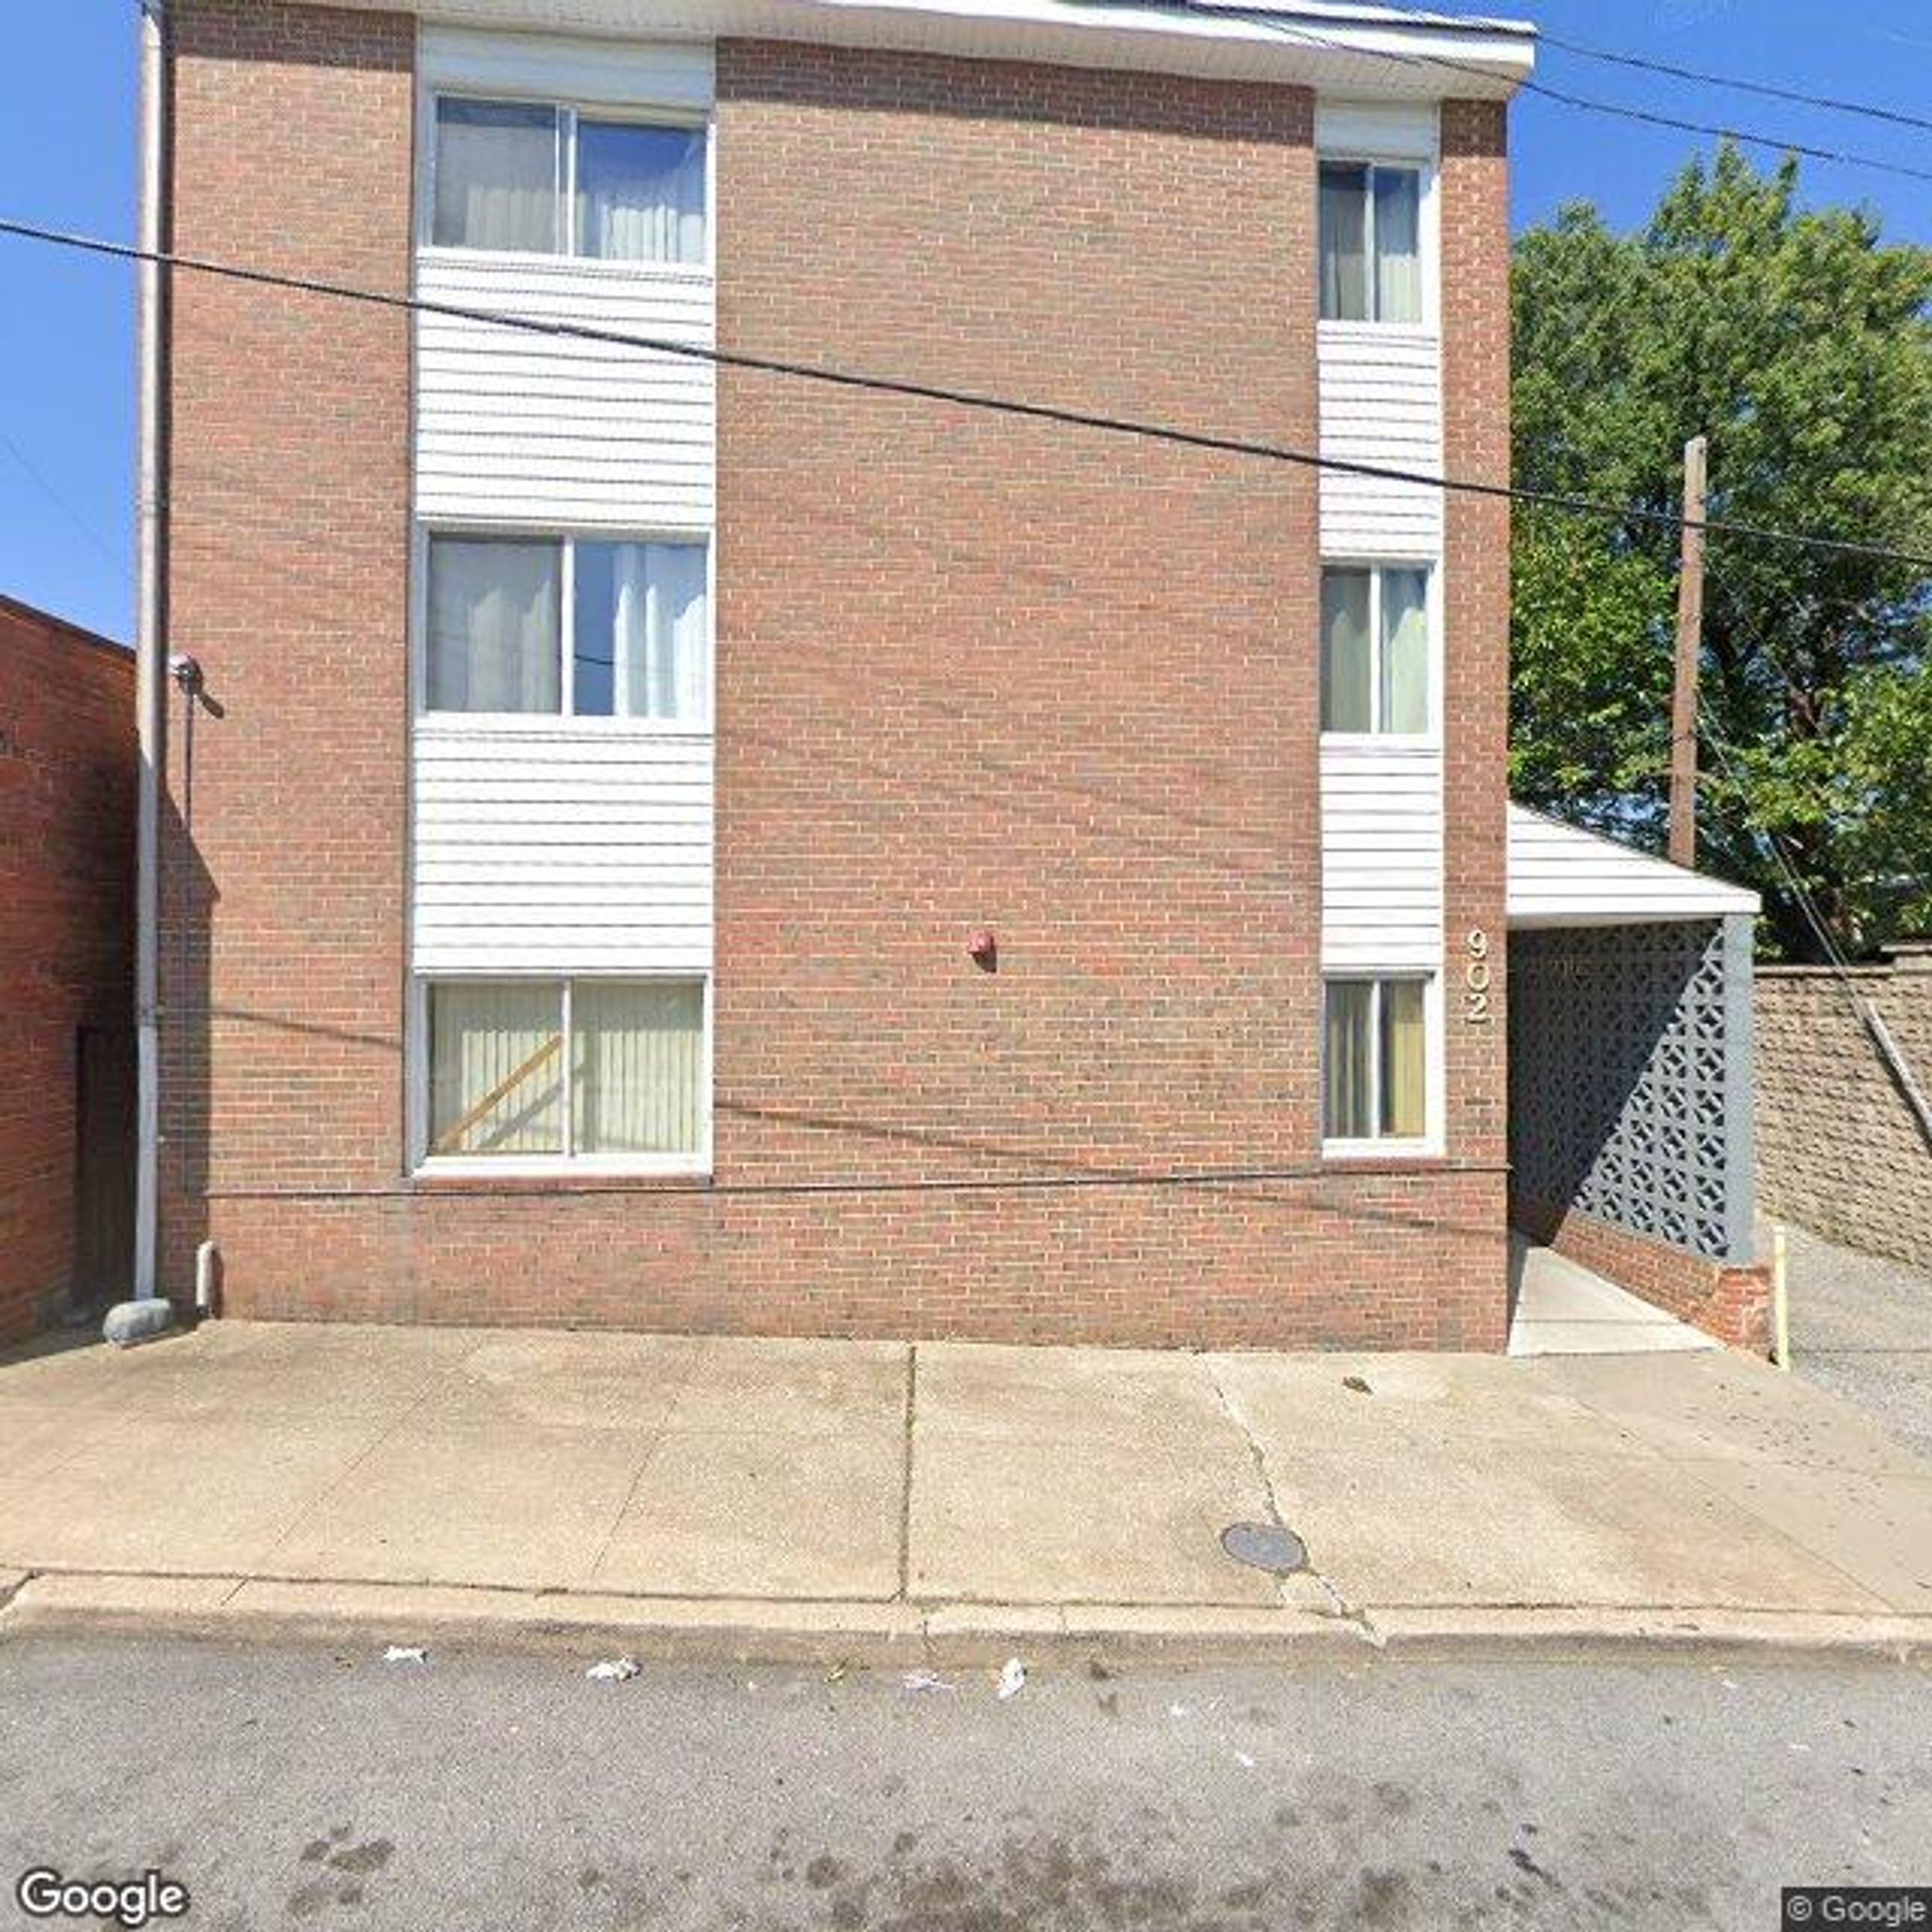 10x7 Bedroom self storage unit in Baltimore, MD